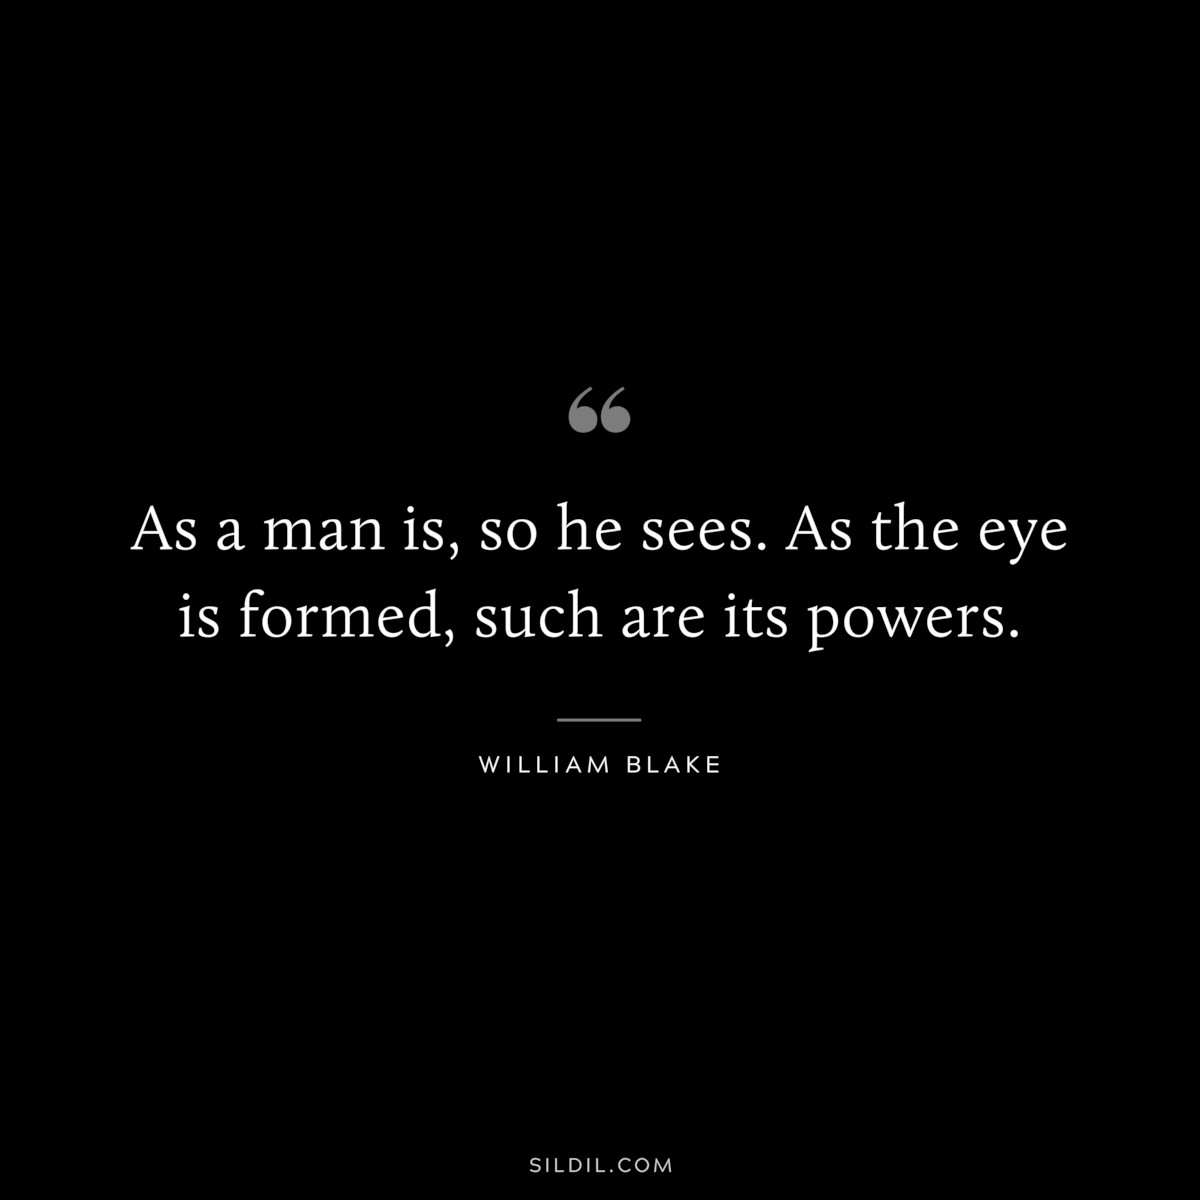 As a man is, so he sees. As the eye is formed, such are its powers. ― William Blake